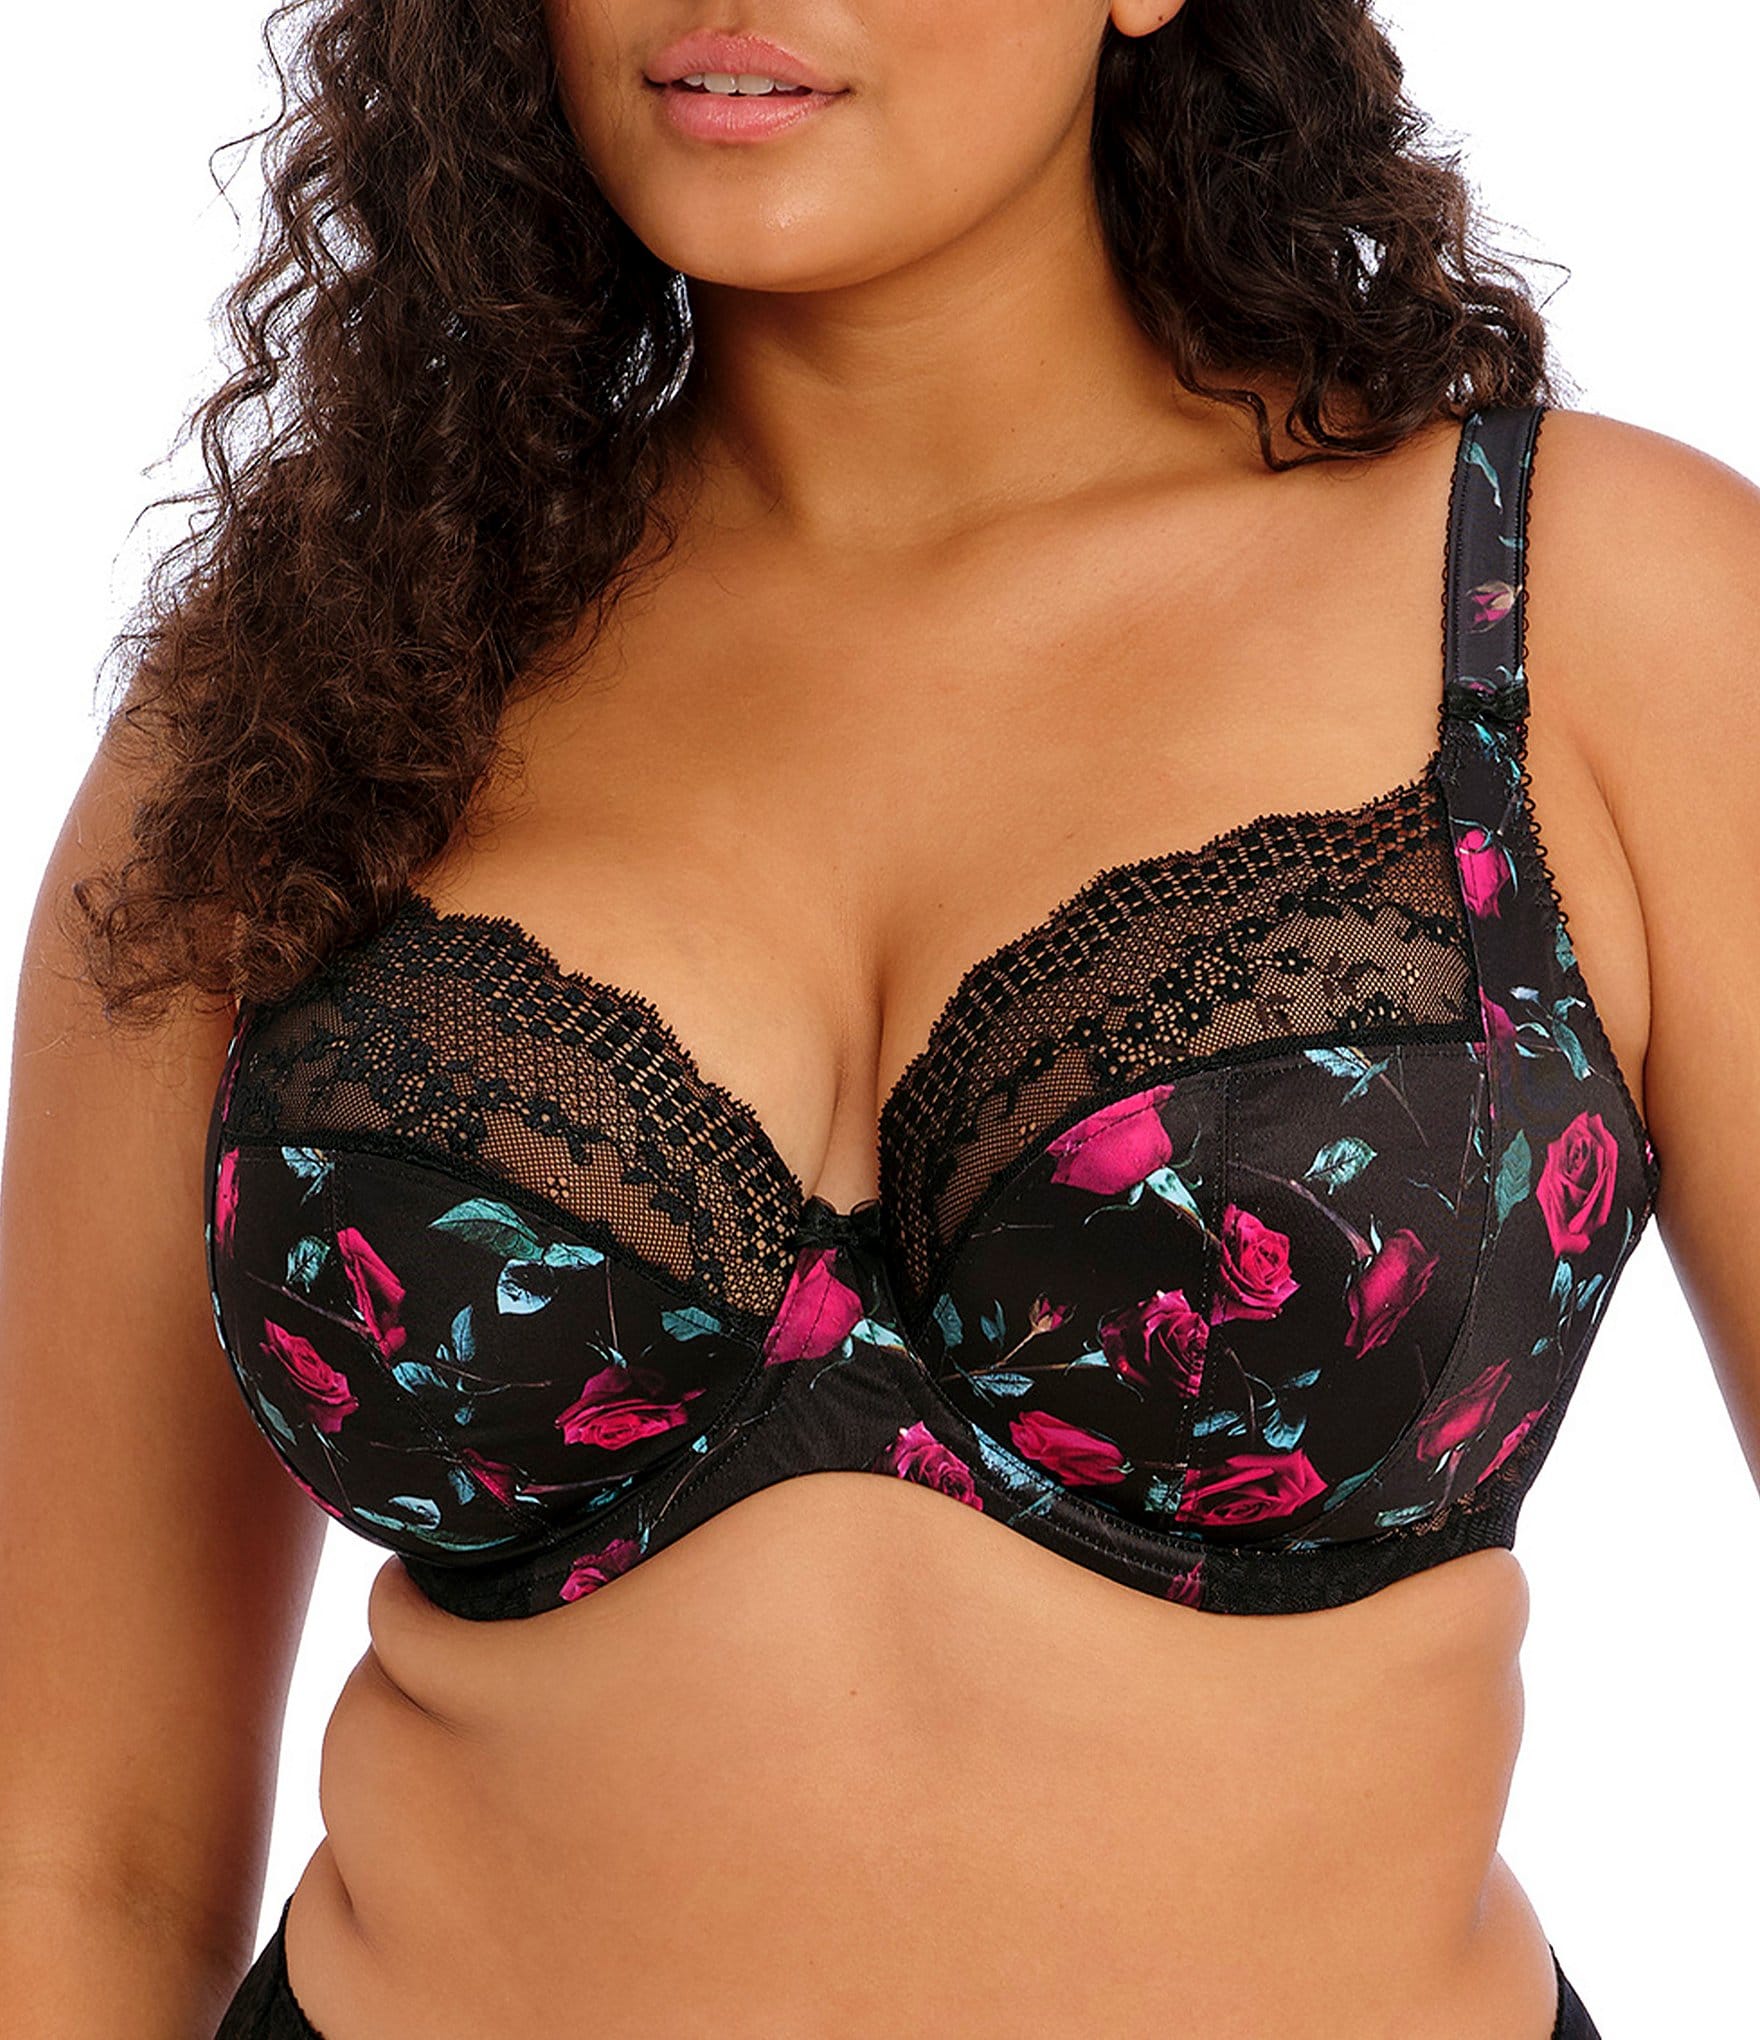 42H - Cabernet » Full-busted Underwire Bra